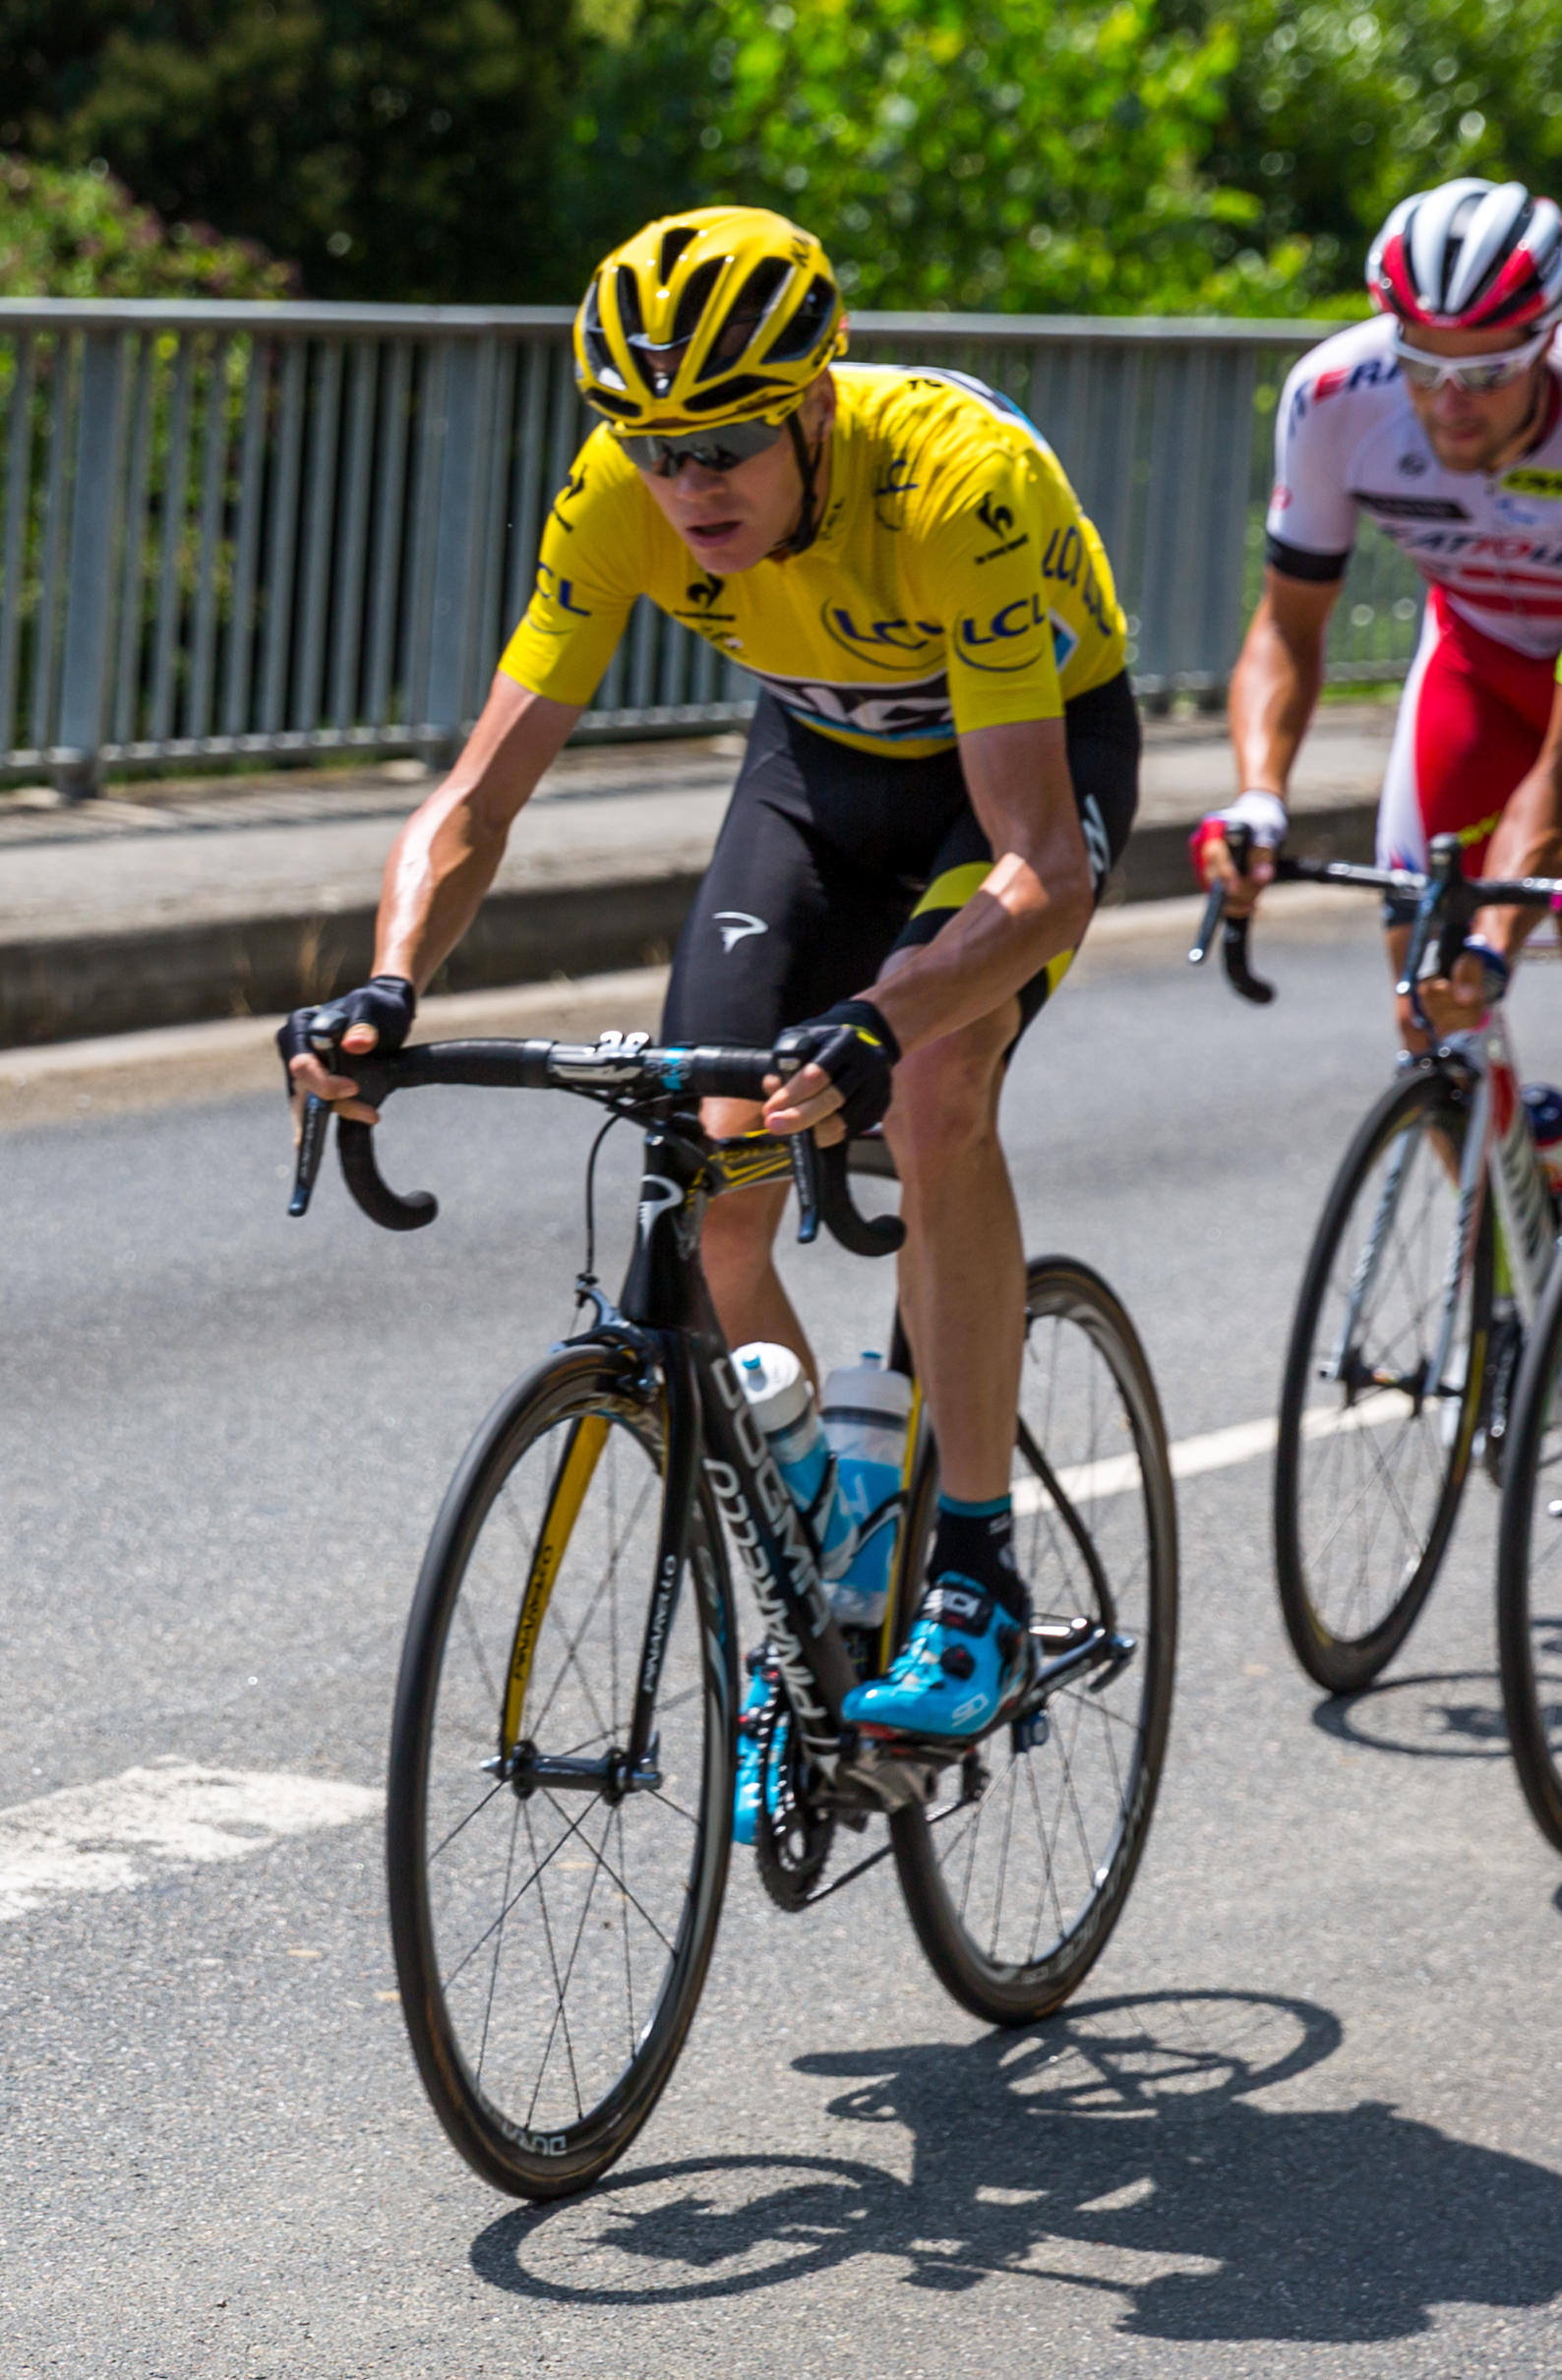 Cycling-Froome in hospital after crash in Criterium du Dauphine